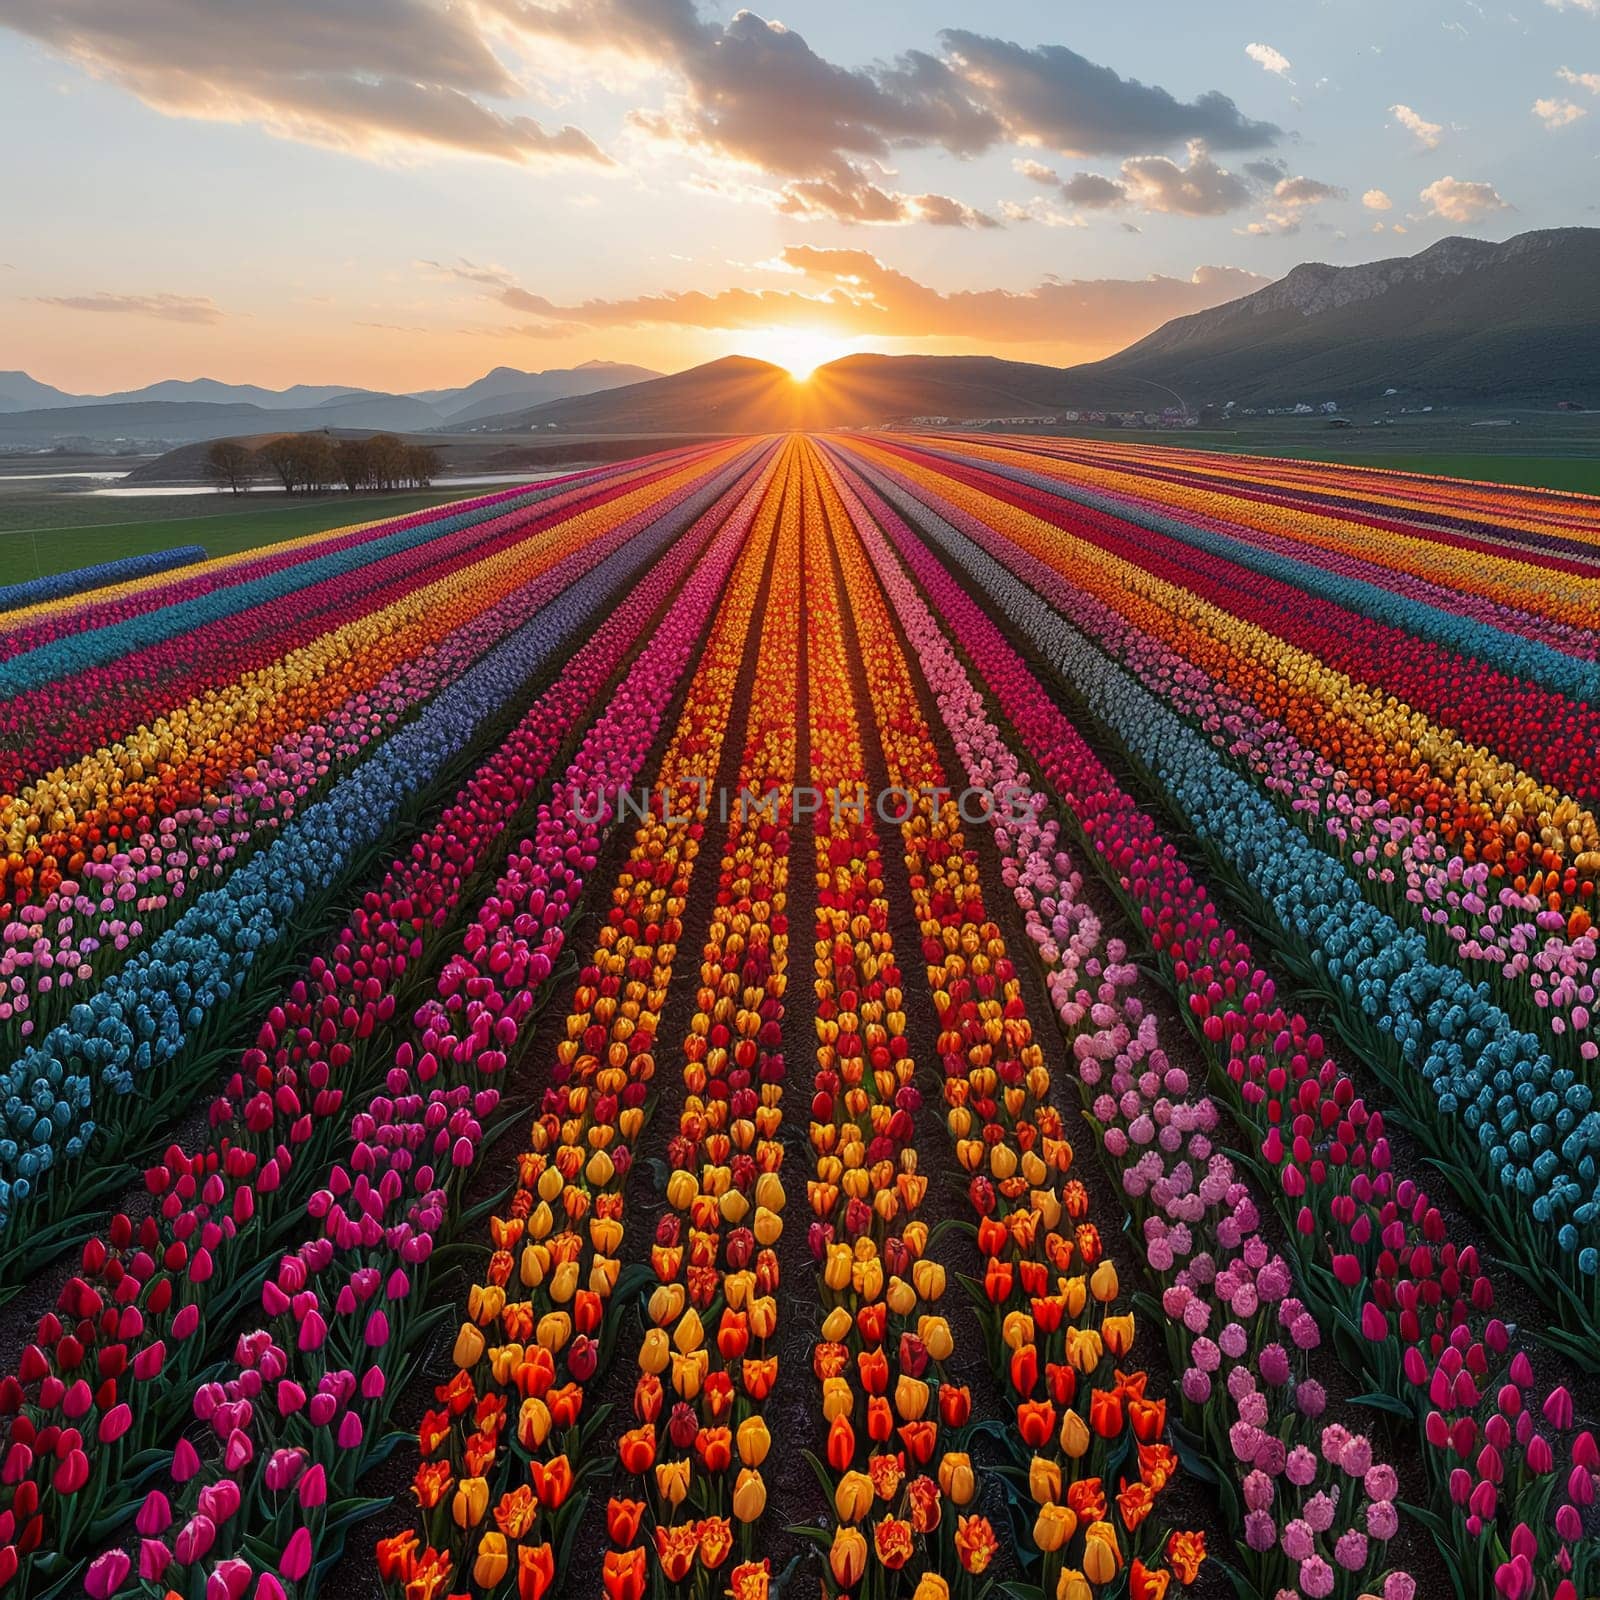 A vibrant tapestry of tulip fields from above, displaying nature's colors in full bloom.